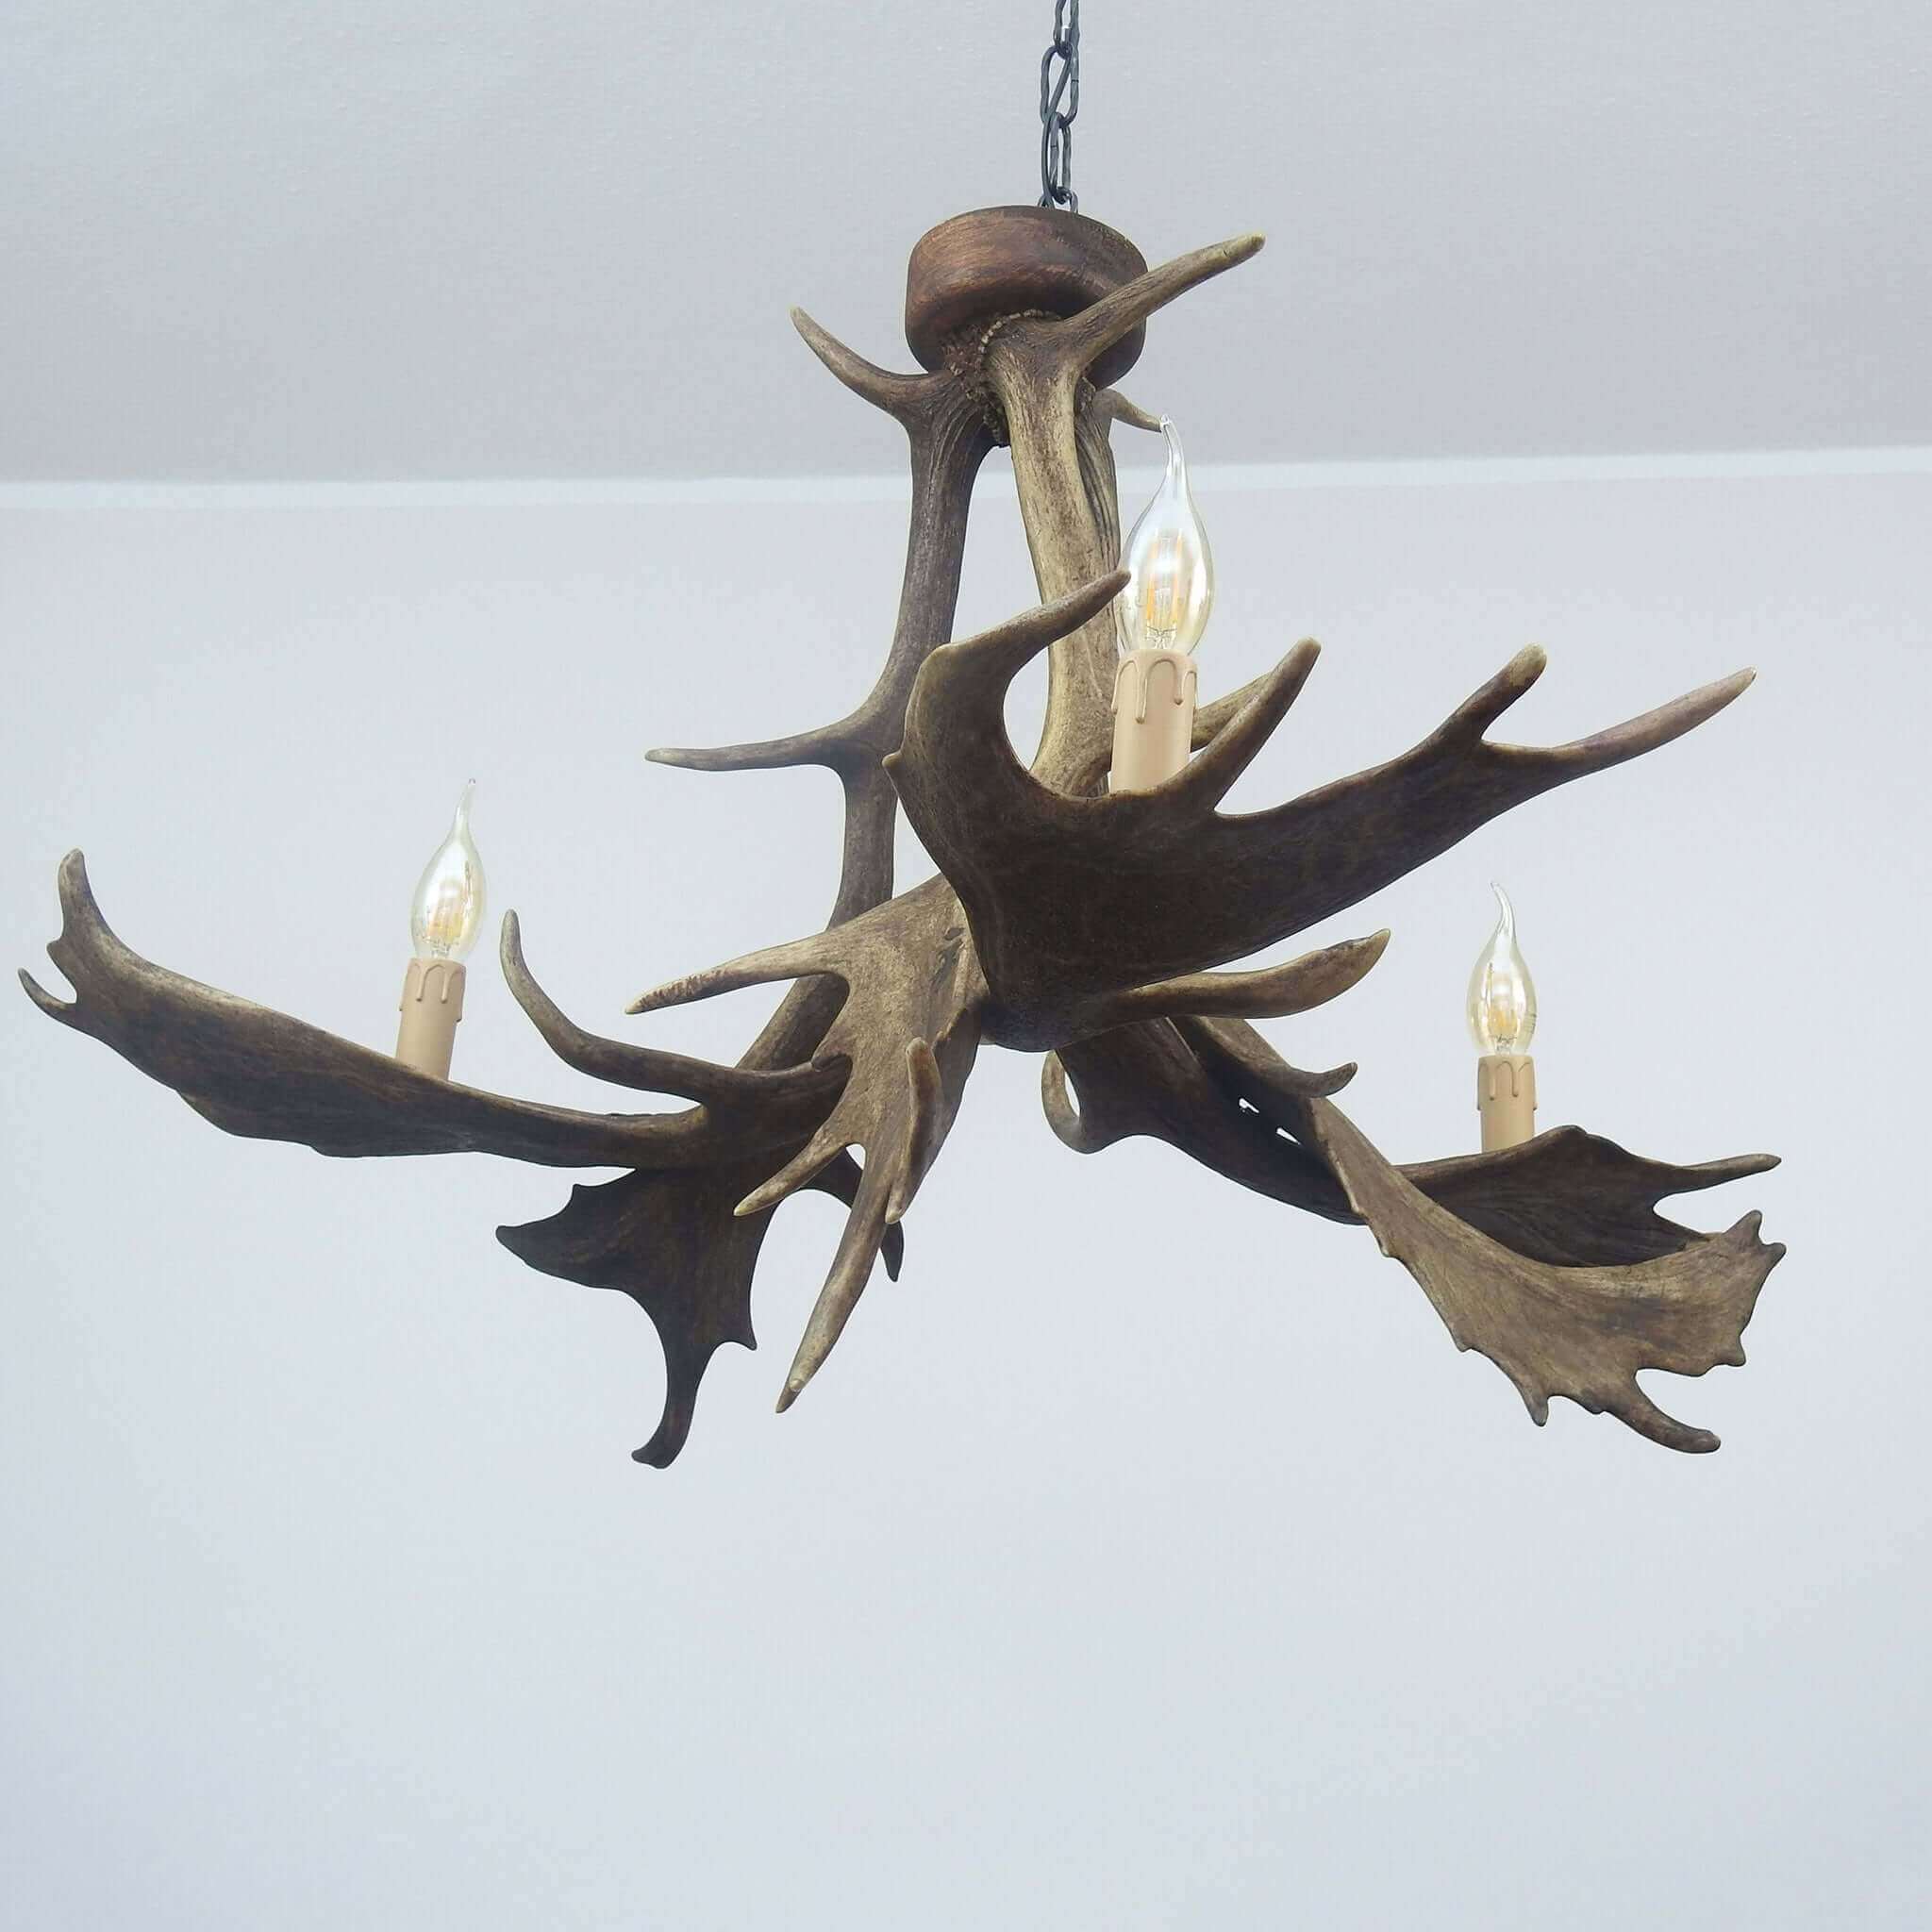 Antler chandelier with candles.